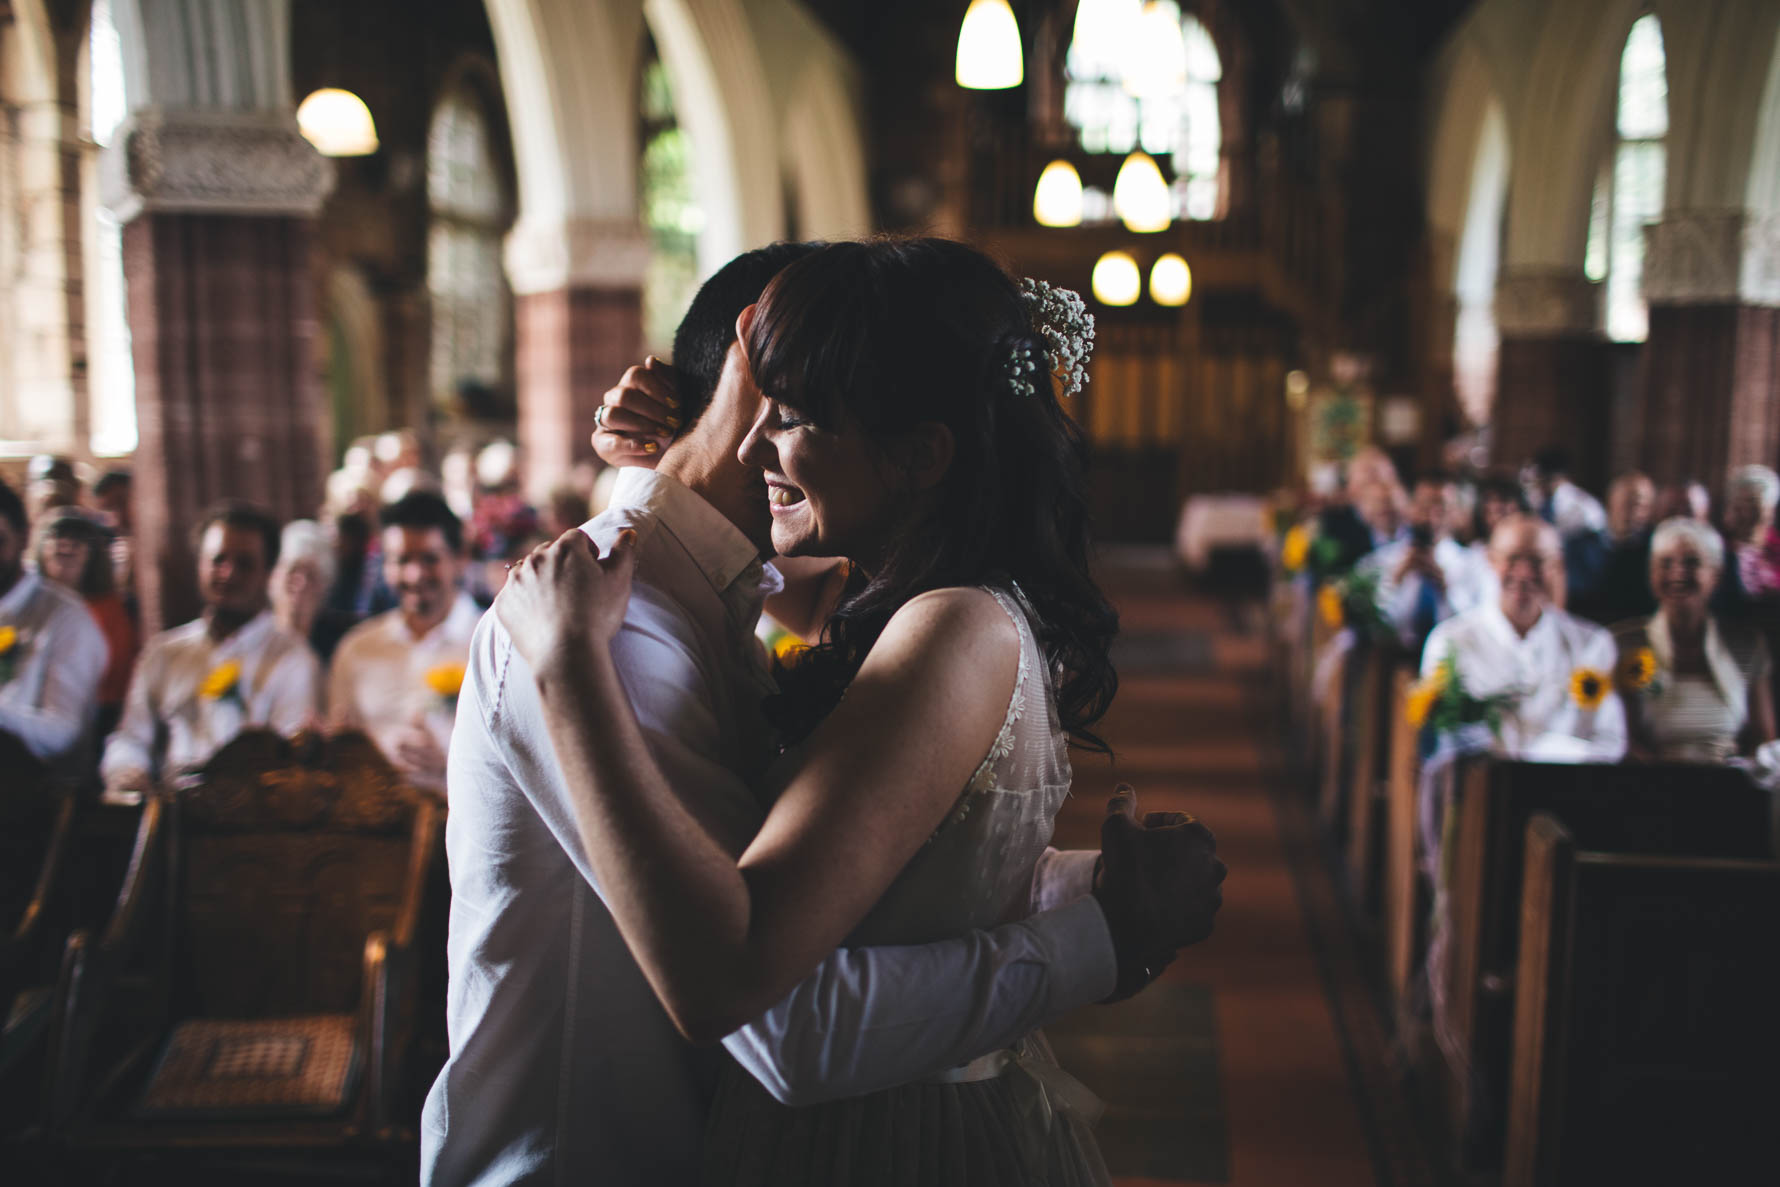 Bride and groom hugging each other at the front of a church in Devon after just getting married. The wedding party is seated in the church pews in the background